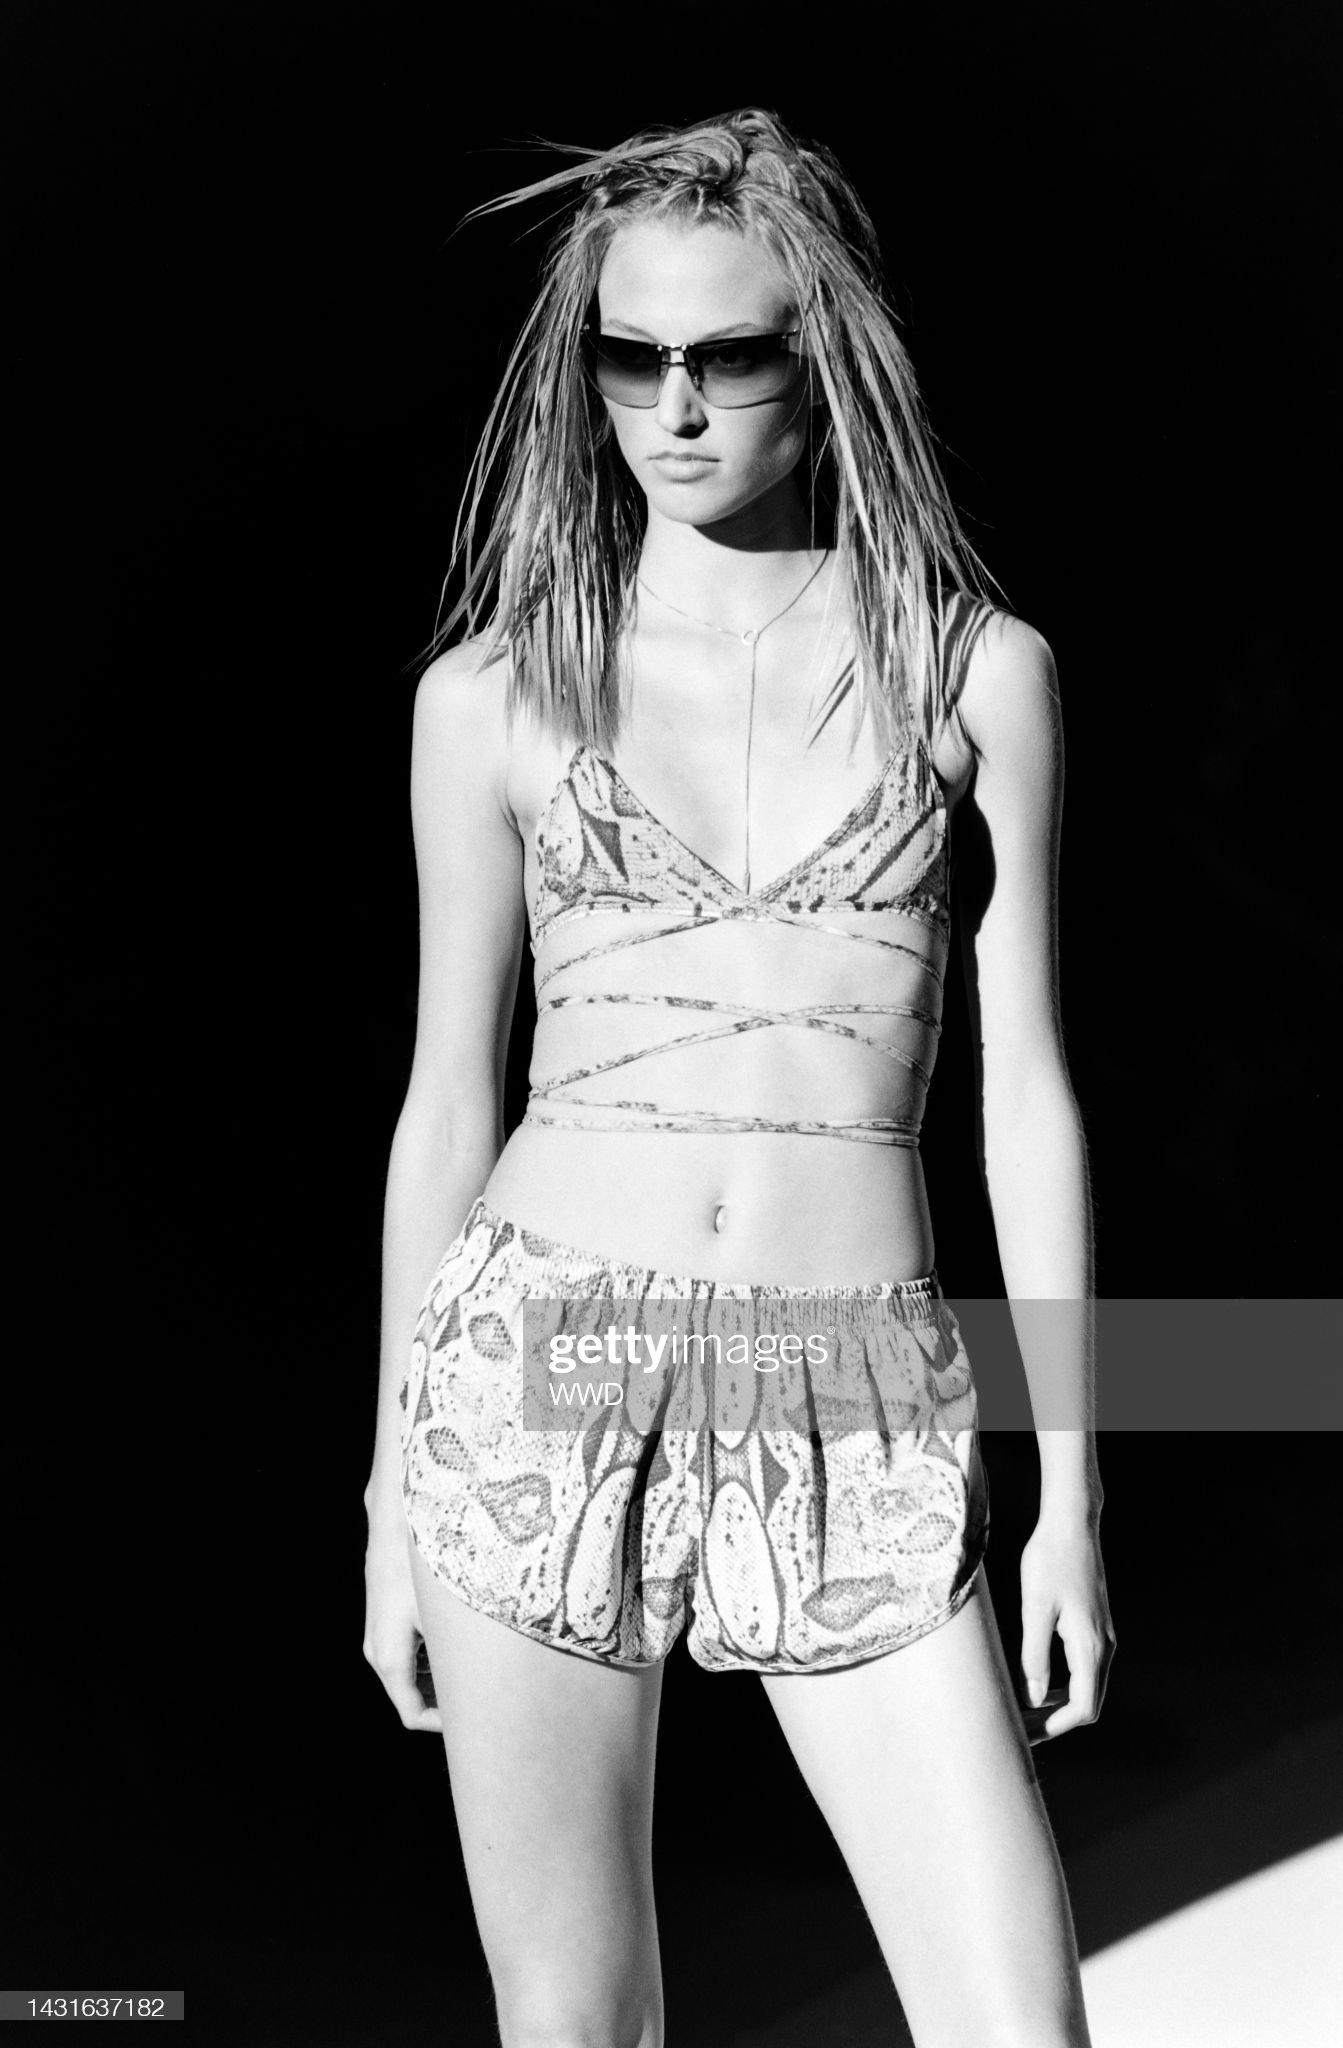 Presenting a pair of tan Gucci snakeskin print mini shorts, designed by Tom Ford. From the Spring/Summer 2000 collection, these shorts debuted on the season's runway as part of look 32, modeled by Liisa Winkler. Covered in a snakeskin print, these